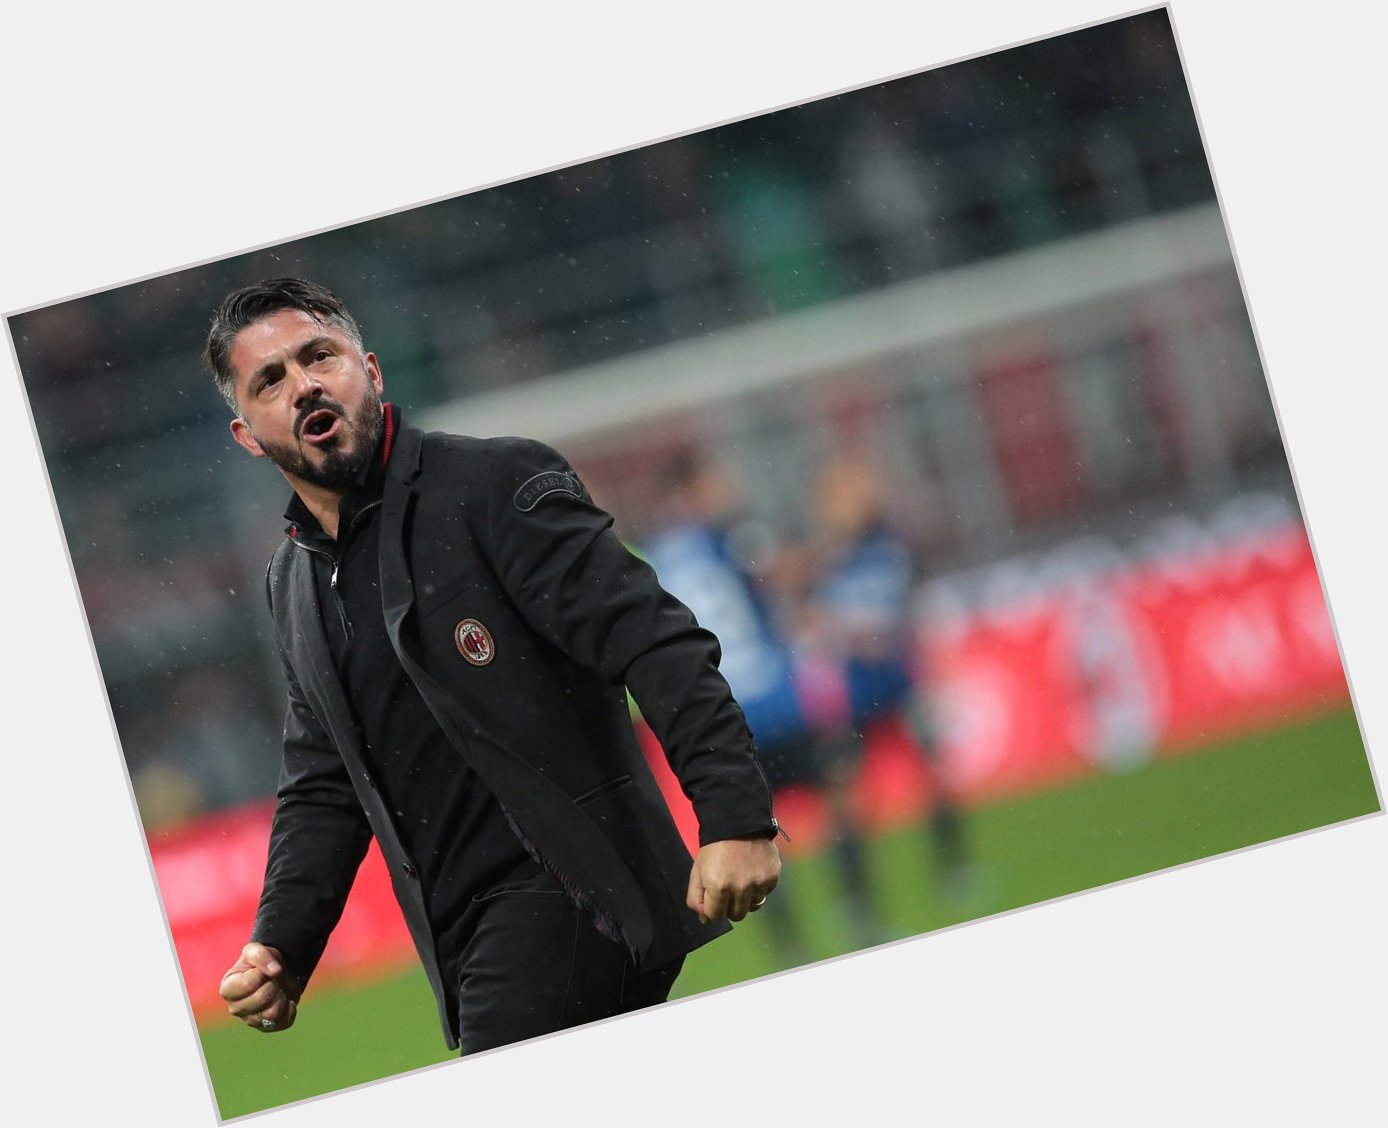 Happy 40th Birthday to Manager and former player Gennaro Gattuso!  